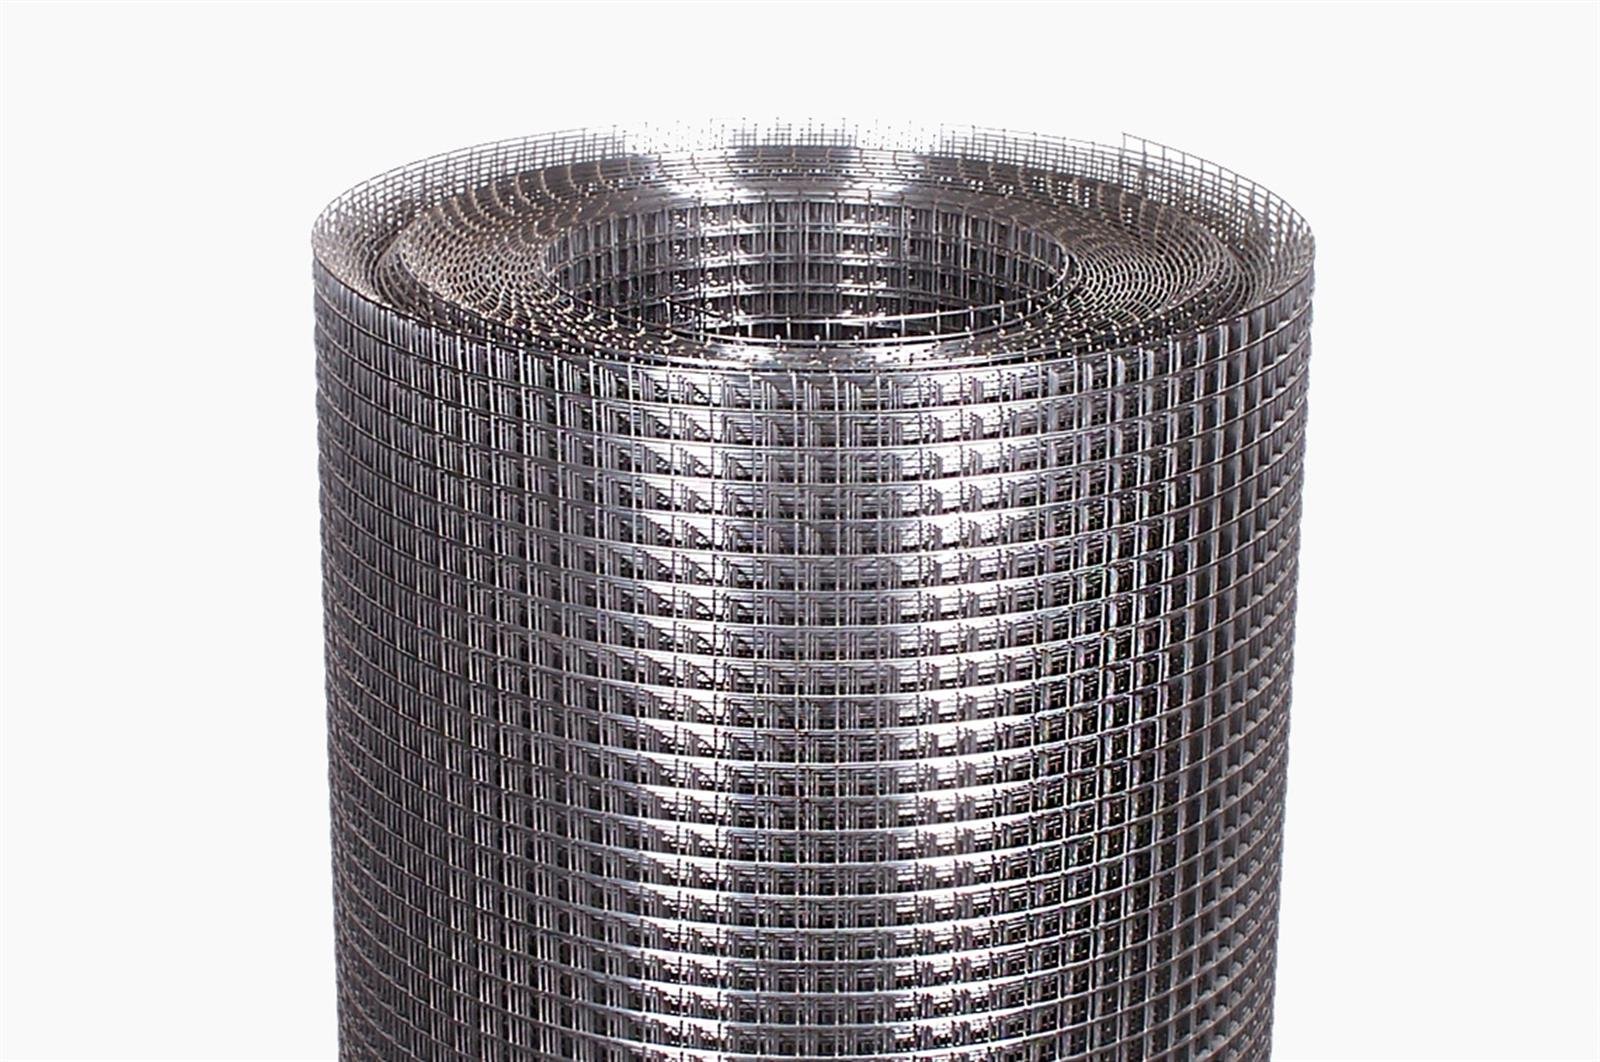 Varied Metal Mesh Selection for Industrial Use